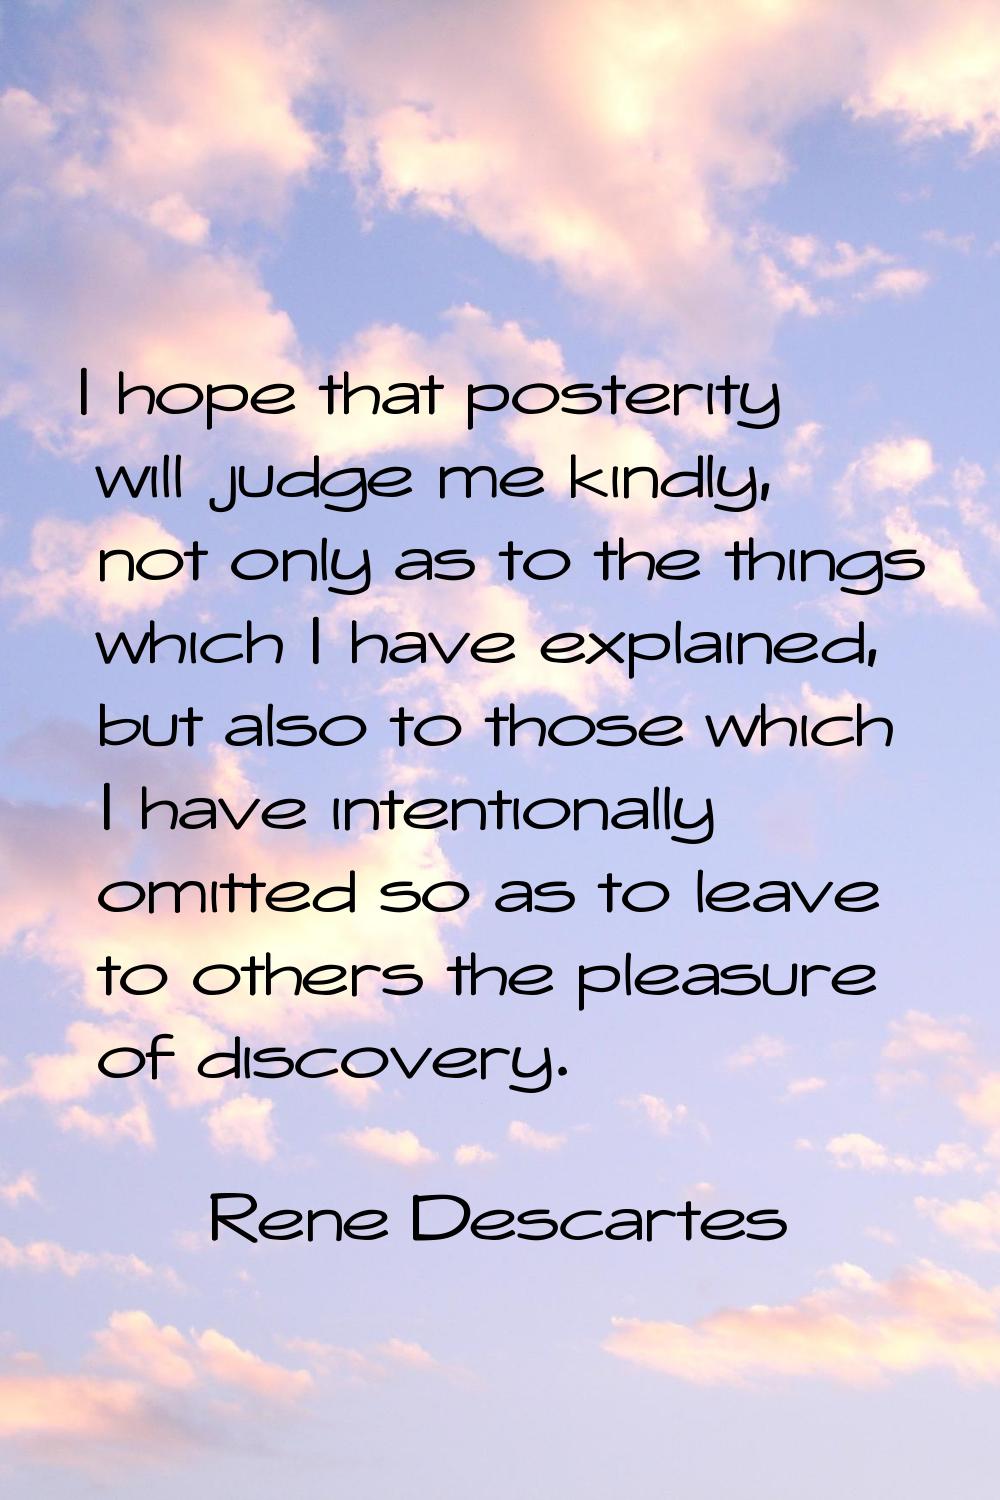 I hope that posterity will judge me kindly, not only as to the things which I have explained, but a